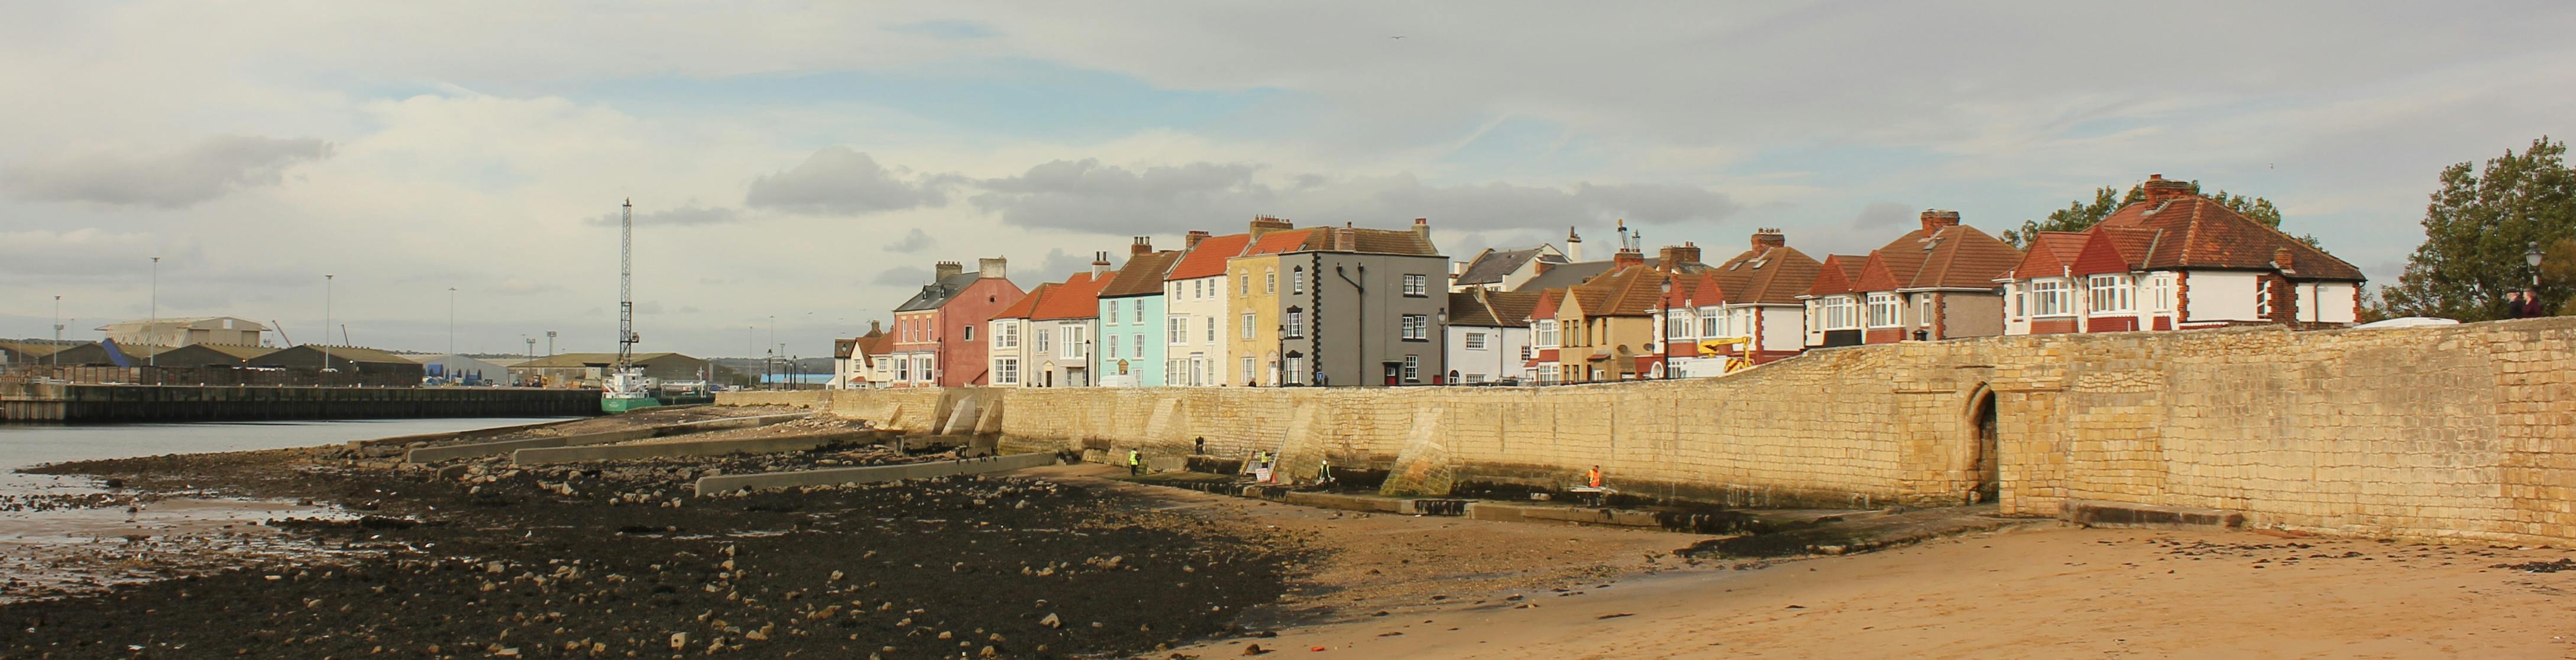 Hartlepool Town Wall from the sea showing the painted houses, St Hilda's Church and Sandwell Gate